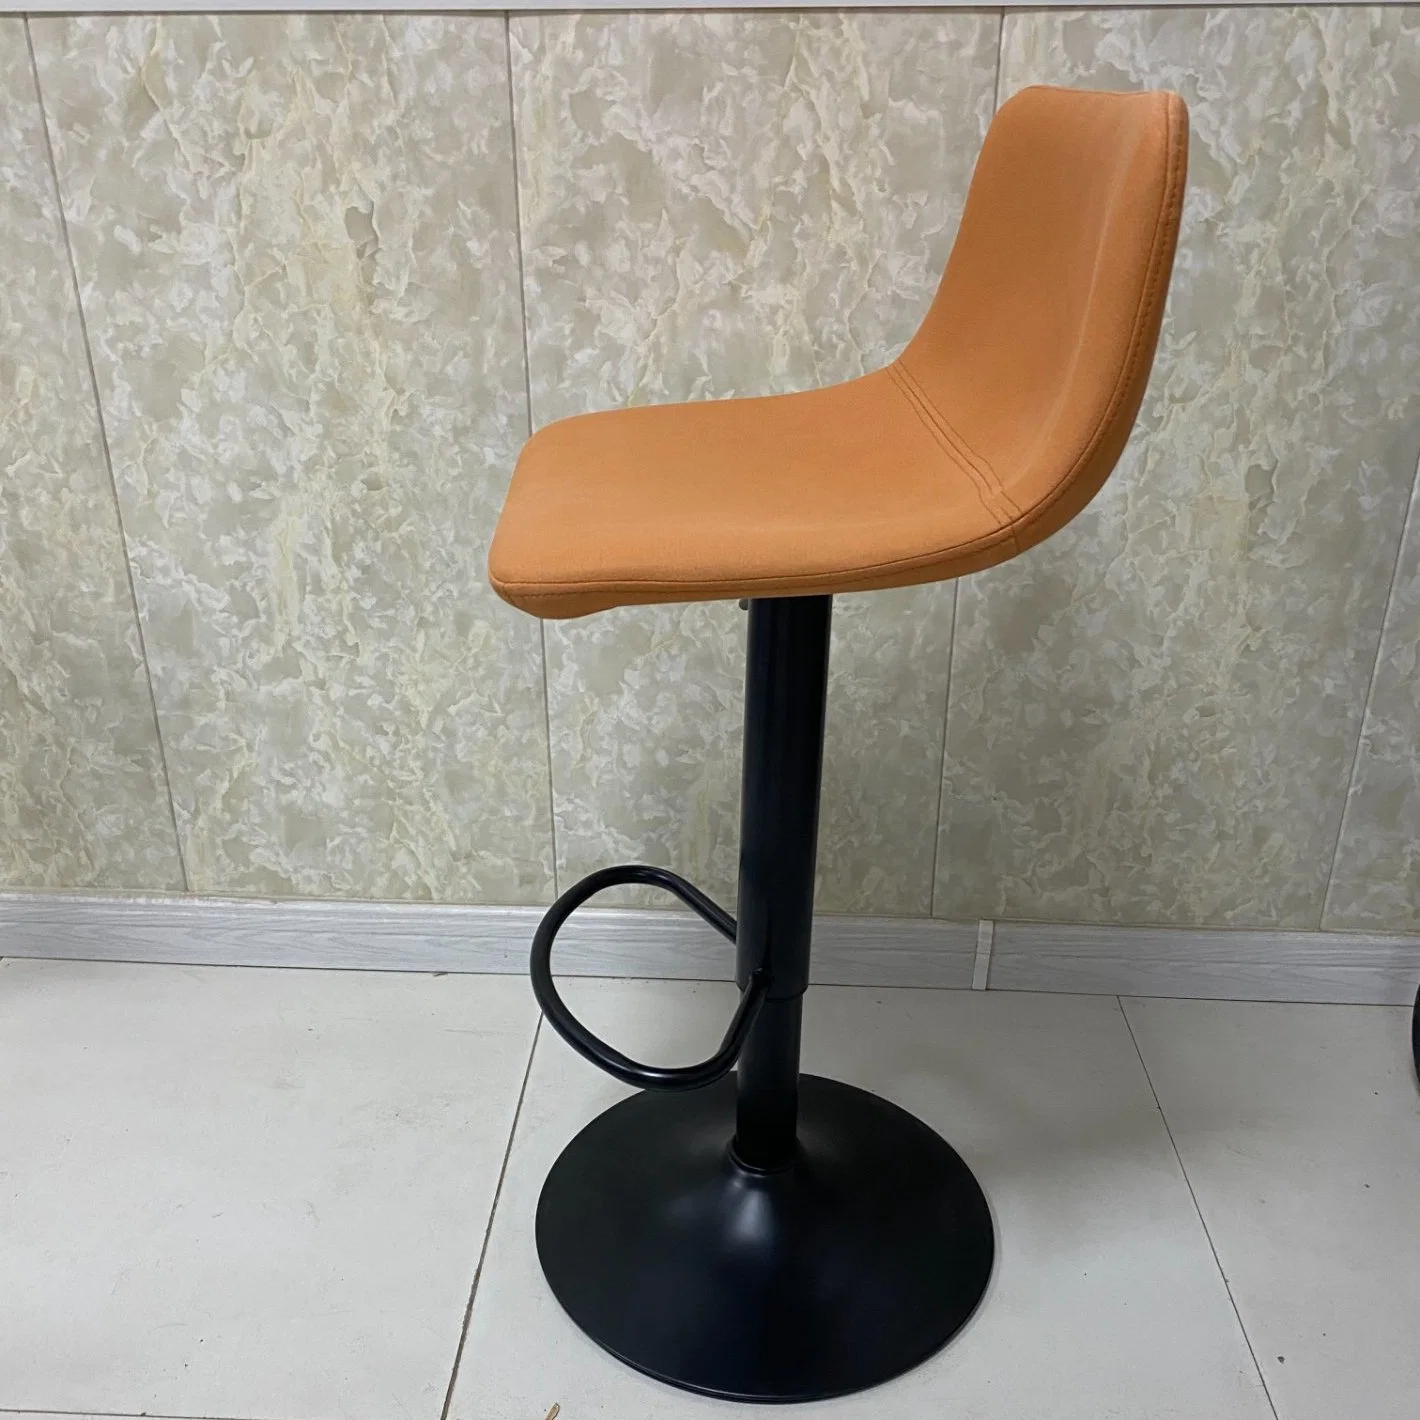 Bar Stool Leather Fabric Bar Stool Dining Cafe Chair Home Modern Furniture